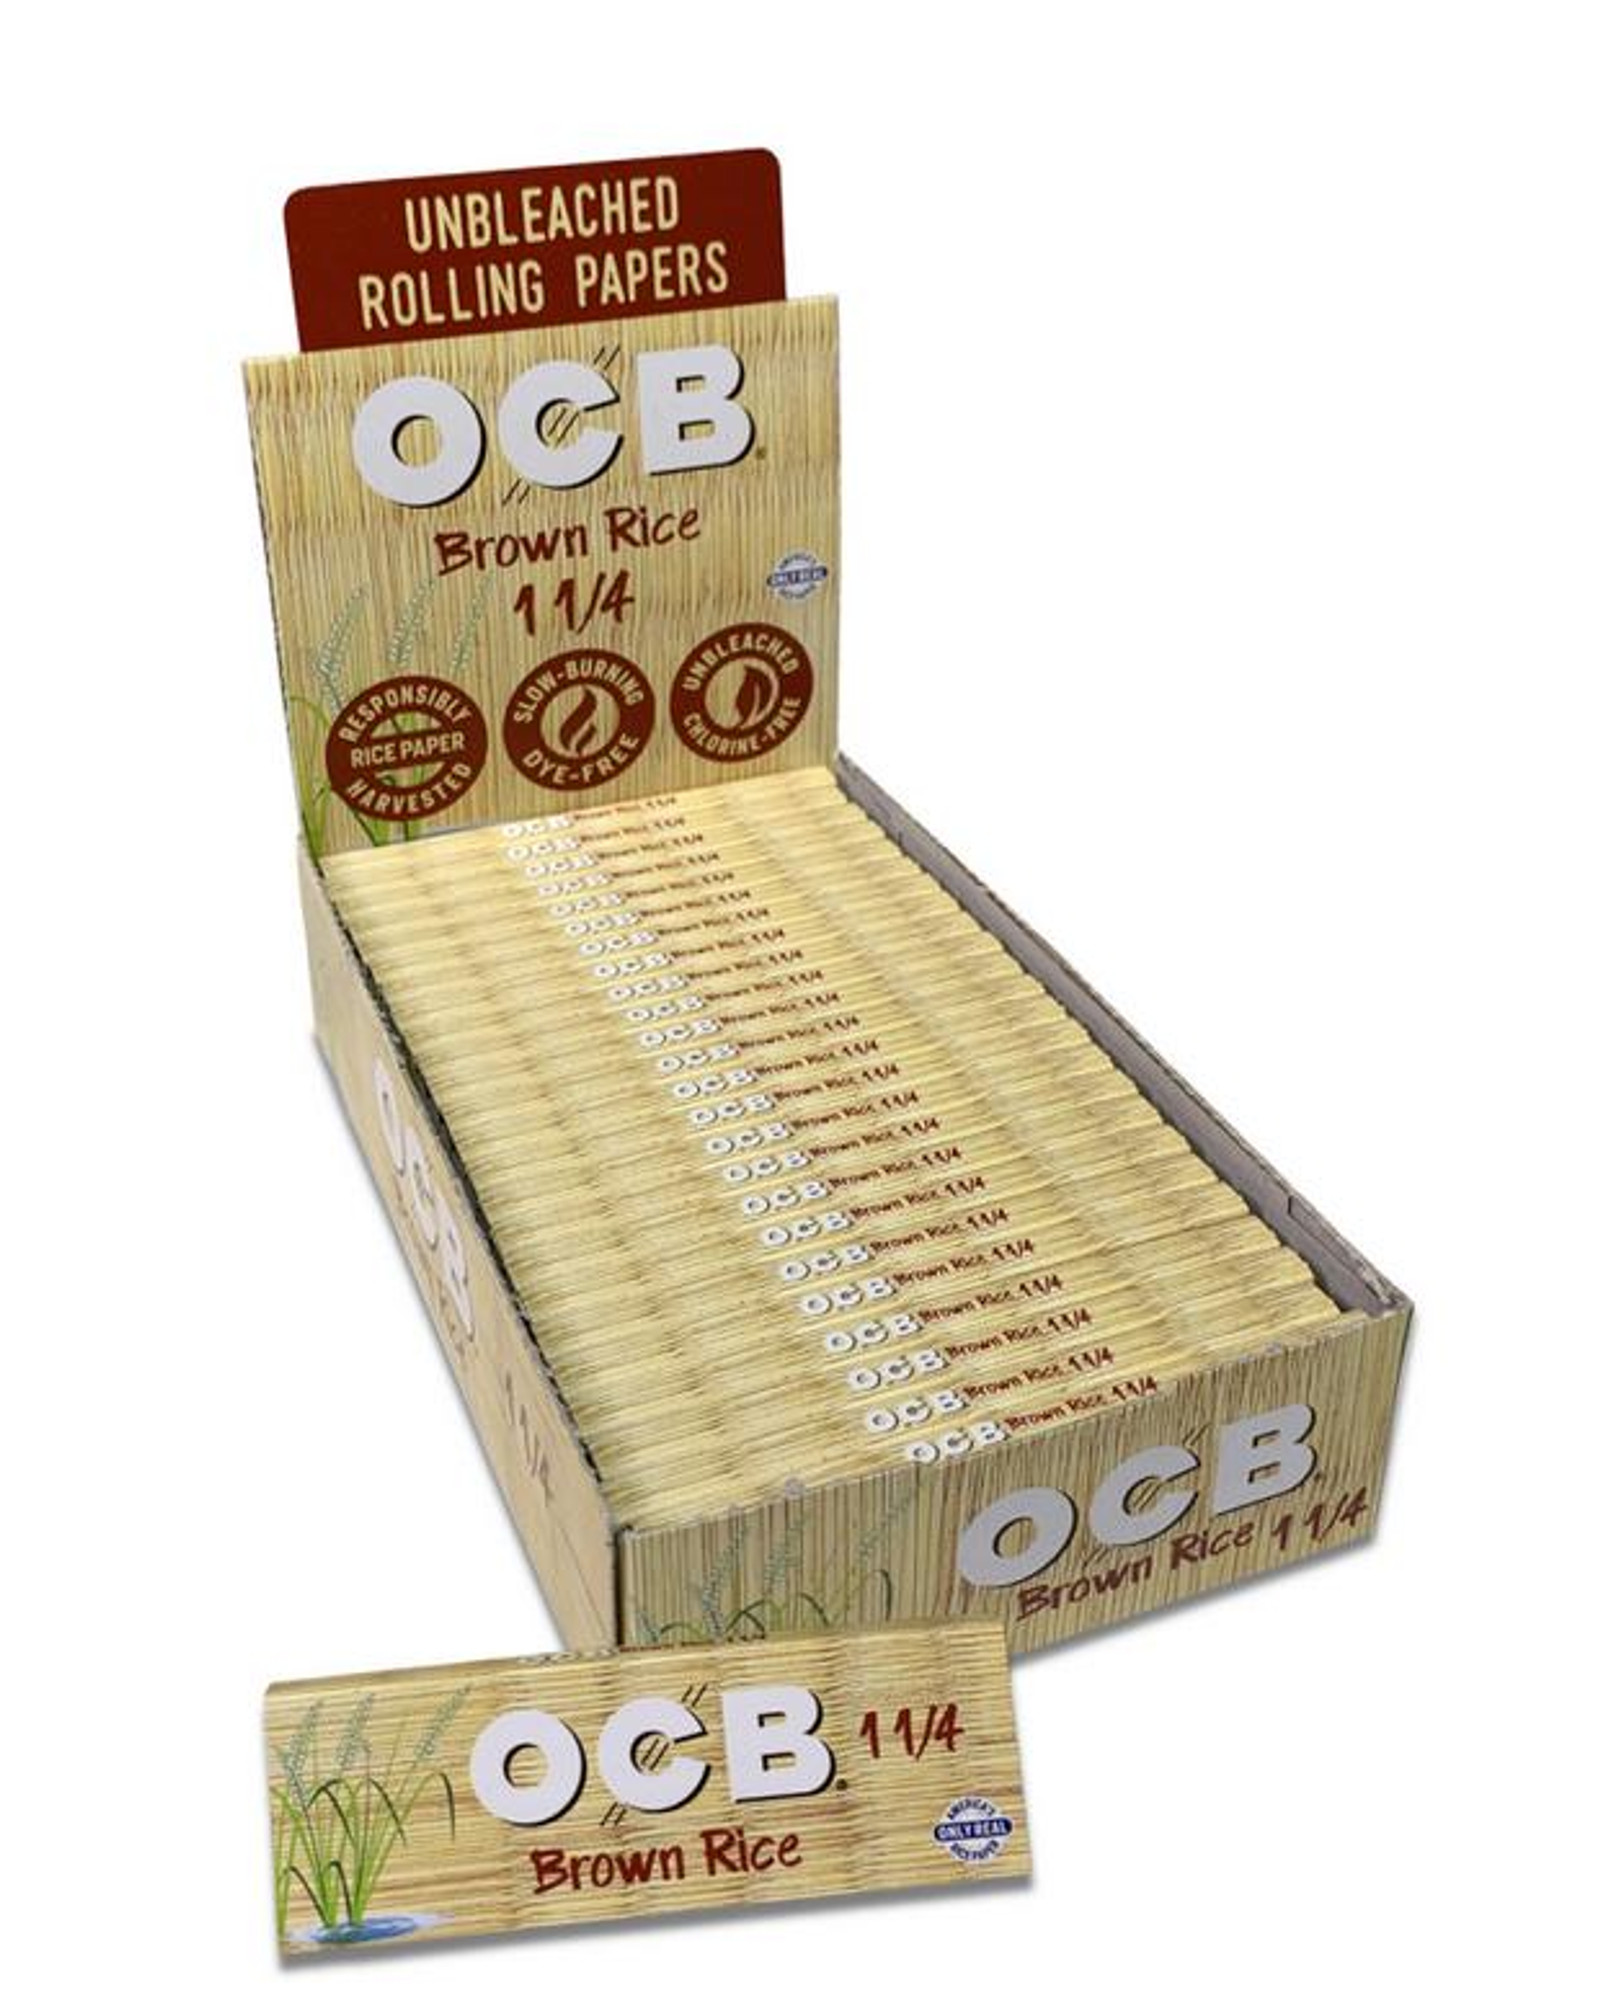 OCB BROWN RICE 1 1/4 ROLLING PAPERS - 24CT DISPLAY